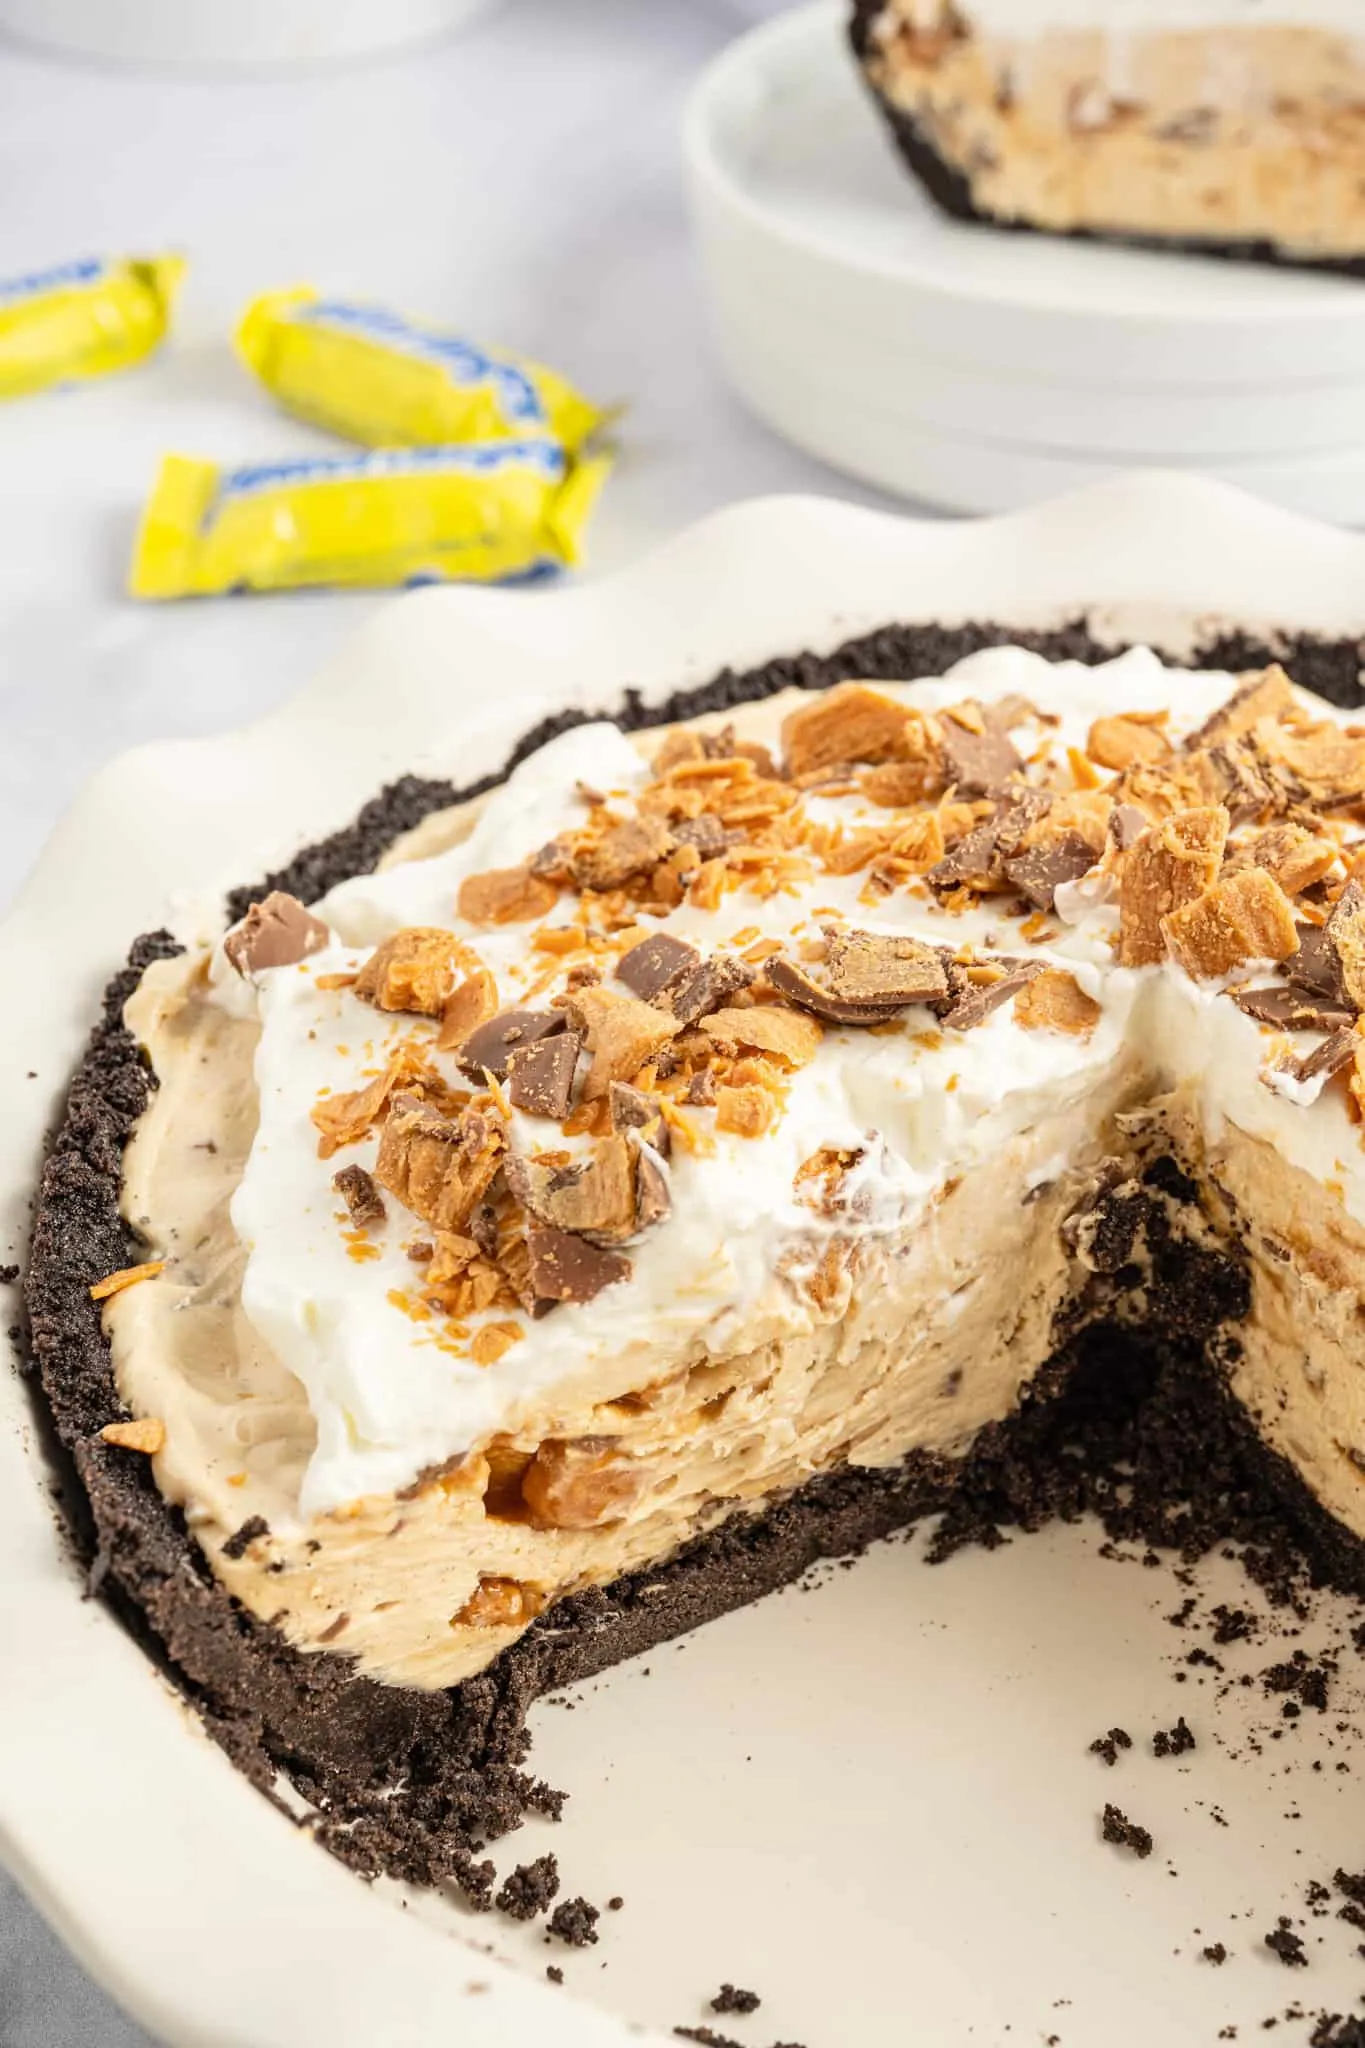 Butterfinger Pie is an easy no bake dessert recipe with an Oreo crust and a creamy peanut butter filling loaded with crumbled Butterfinger candy bars.